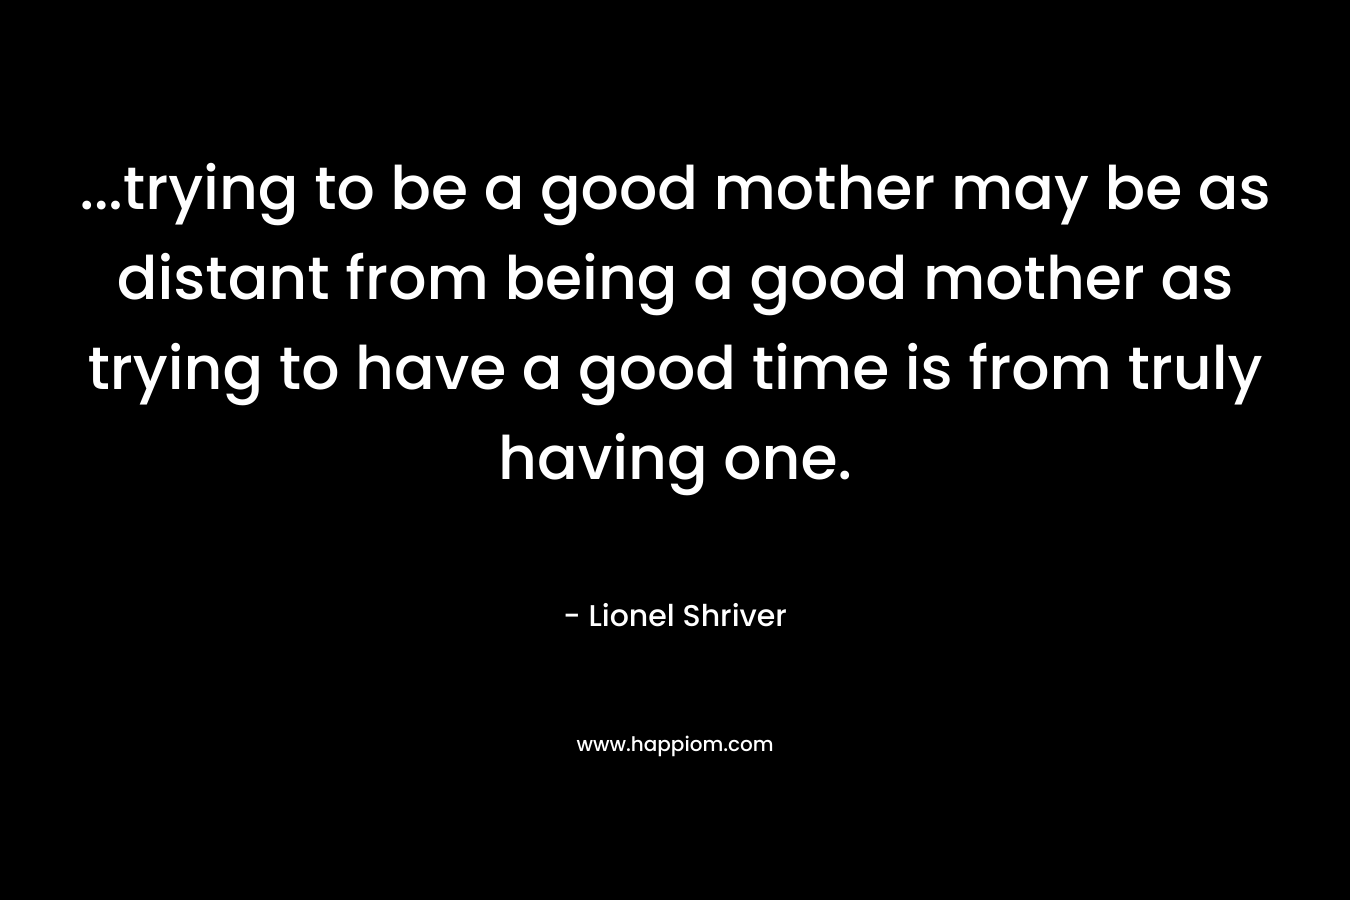 ...trying to be a good mother may be as distant from being a good mother as trying to have a good time is from truly having one.